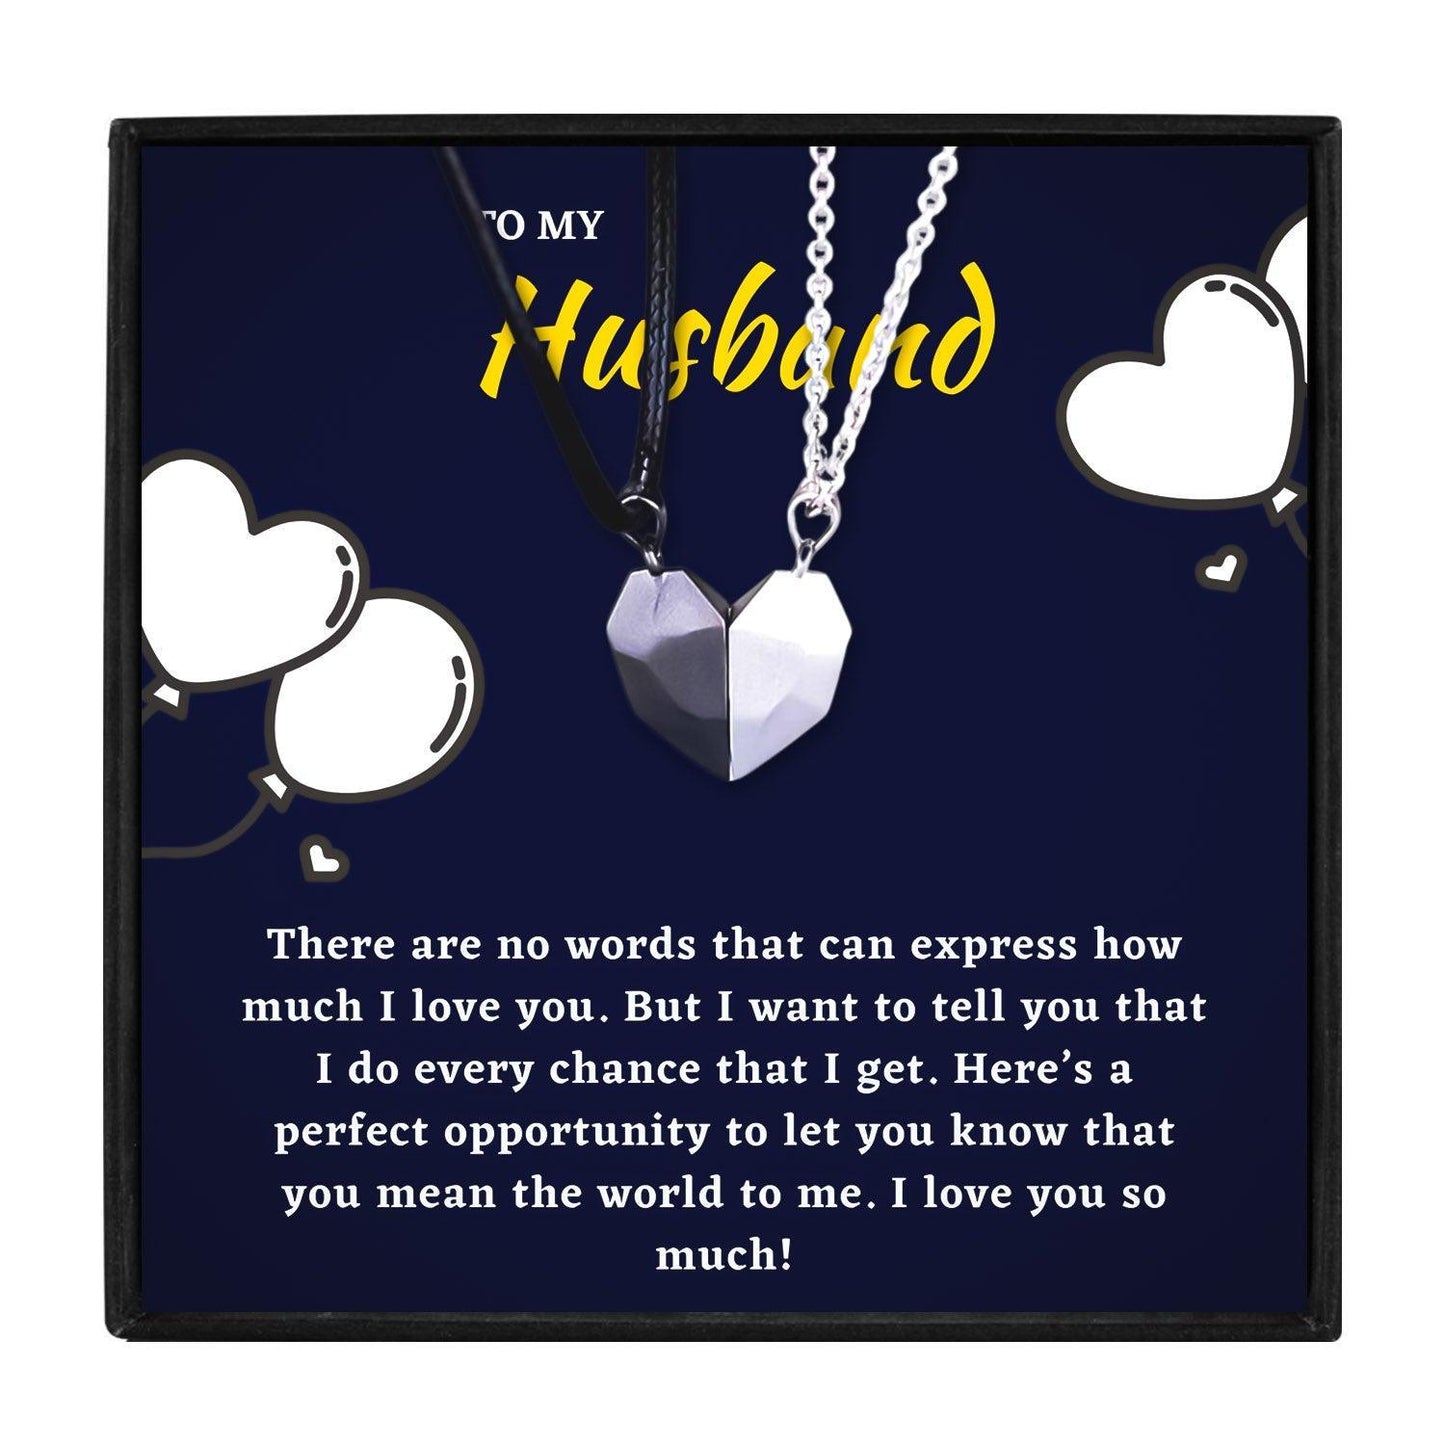 Matching Relationship Necklaces for Husband From Wife for Christmas 2023 | Matching Relationship Necklaces for Husband From Wife - undefined | birthday gift for hubby, birthday ideas for husband, husband gift ideas, Matching Relationship Necklaces for Husband, My Husband Necklace | From Hunny Life | hunnylife.com